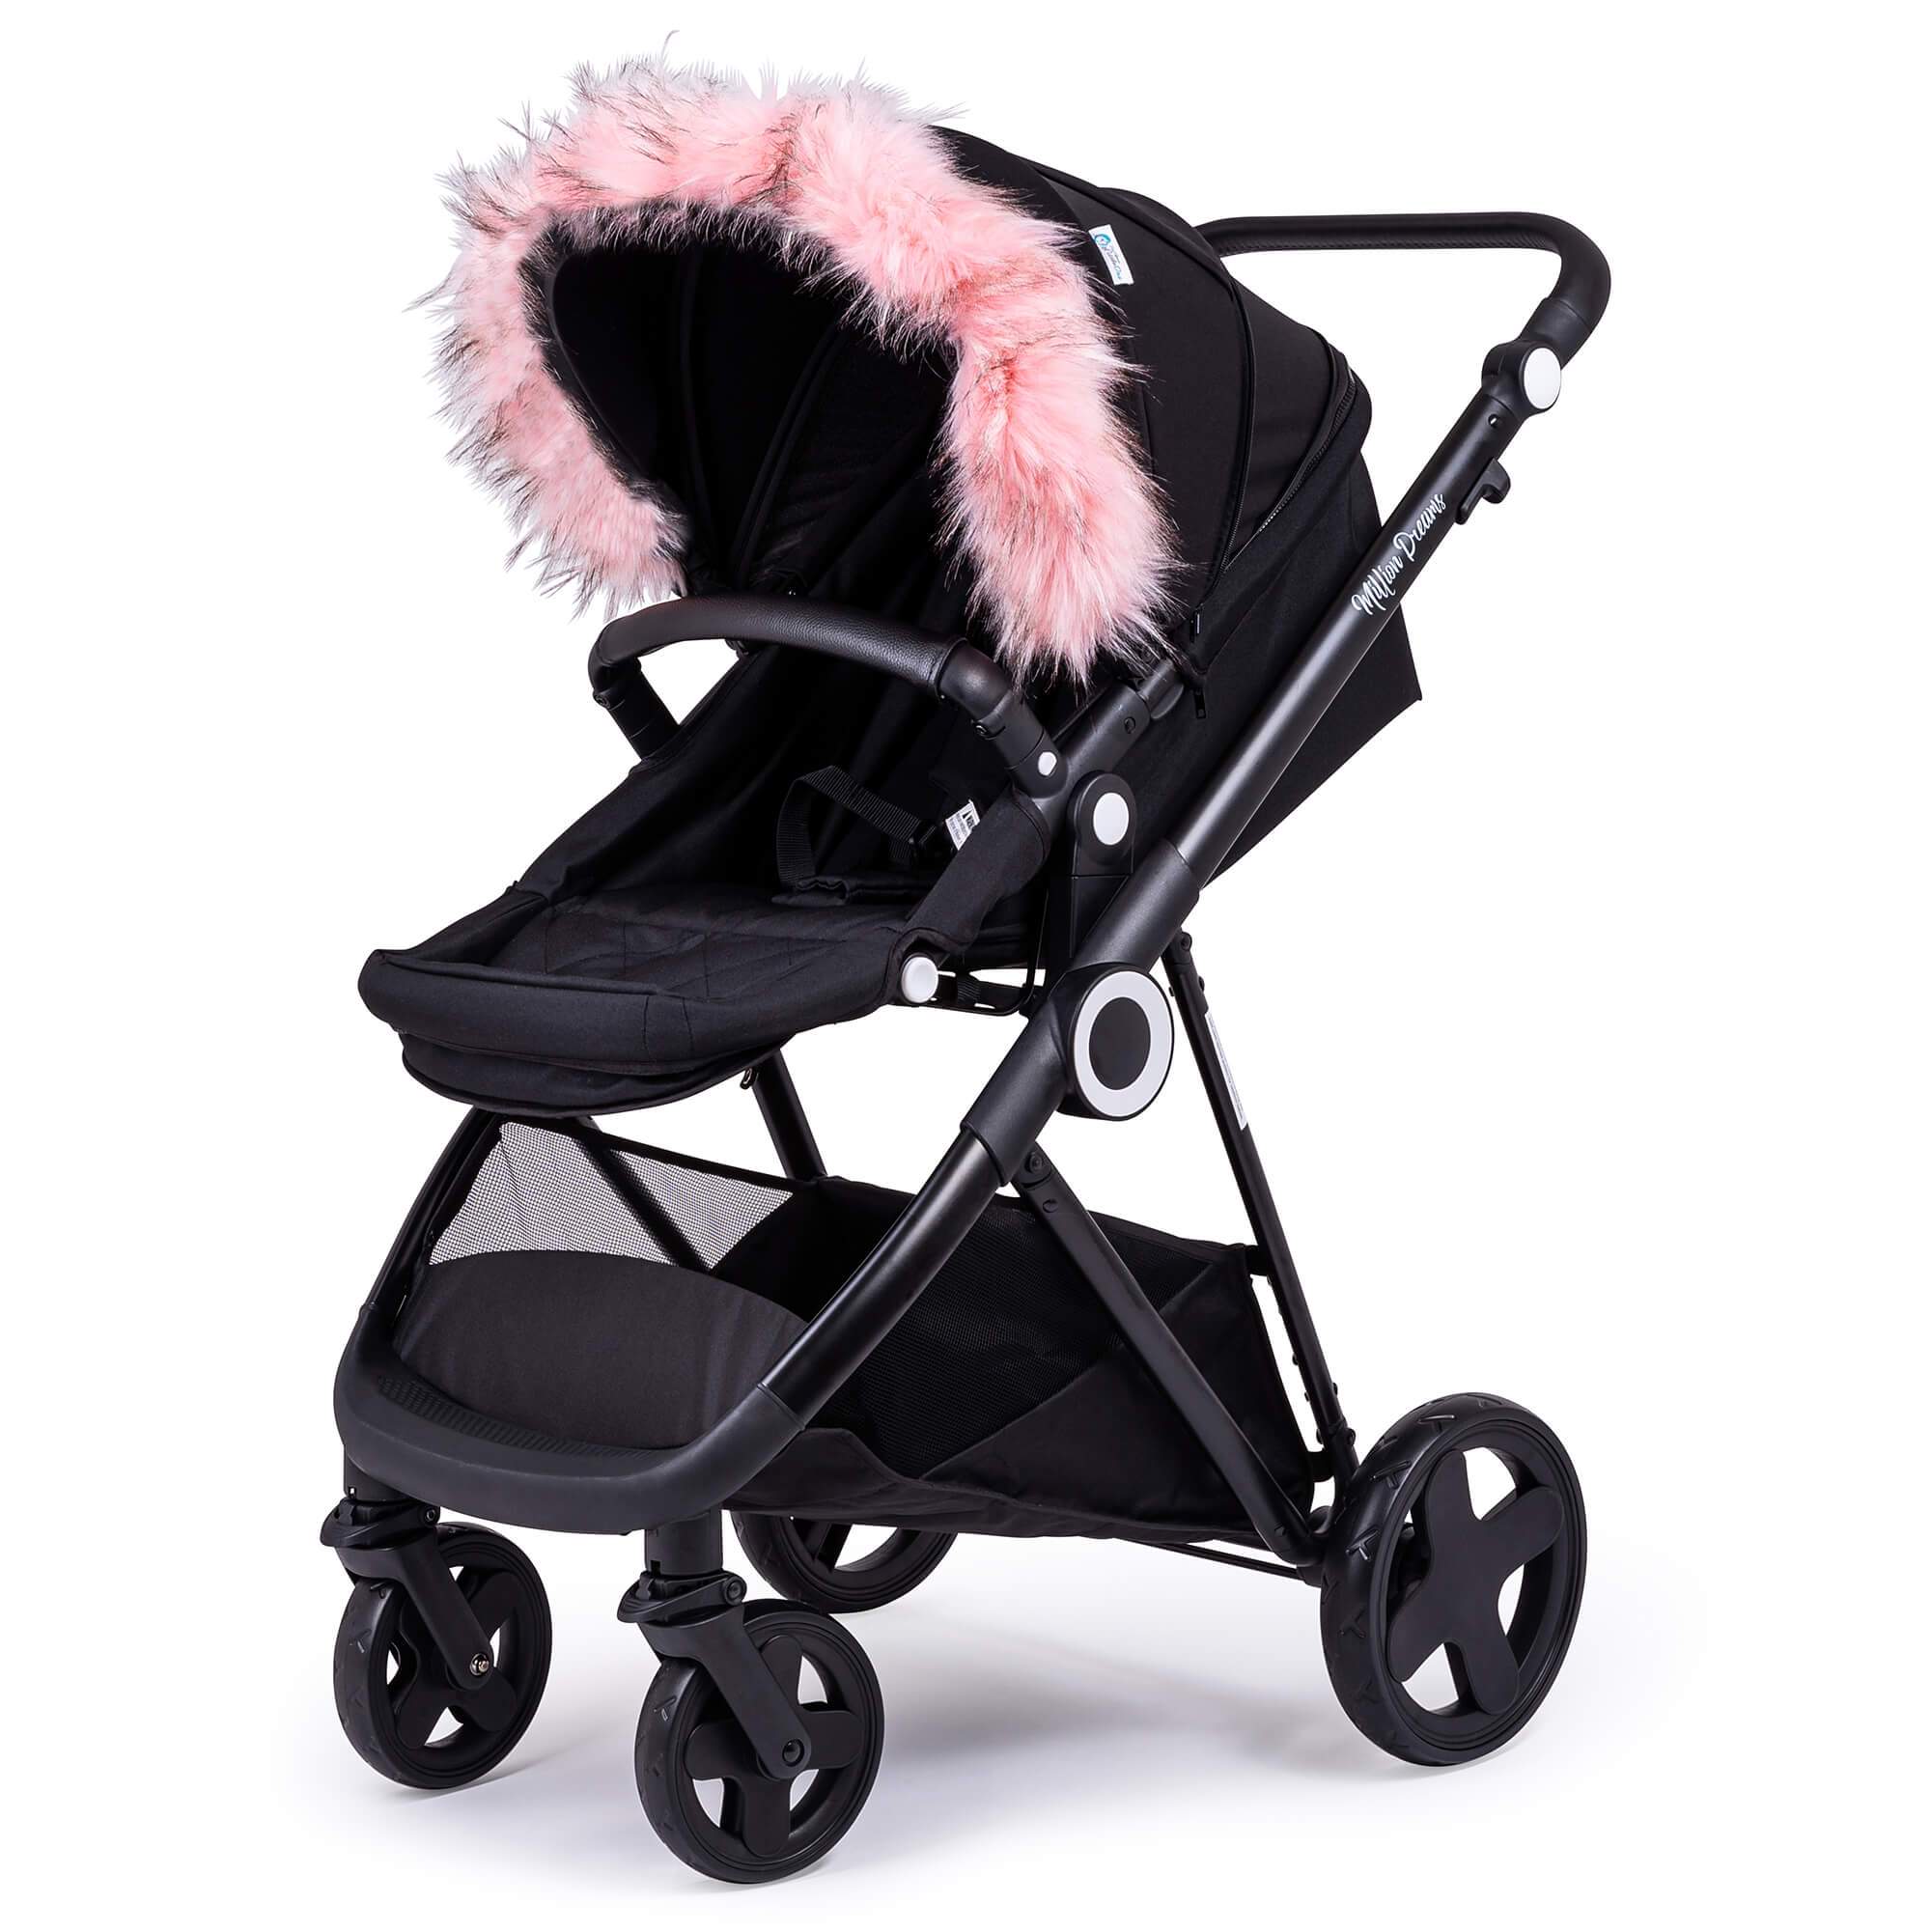 Pram Fur Hood Trim Attachment for Pushchair Compatible with Excel - Light Pink / Fits All Models | For Your Little One